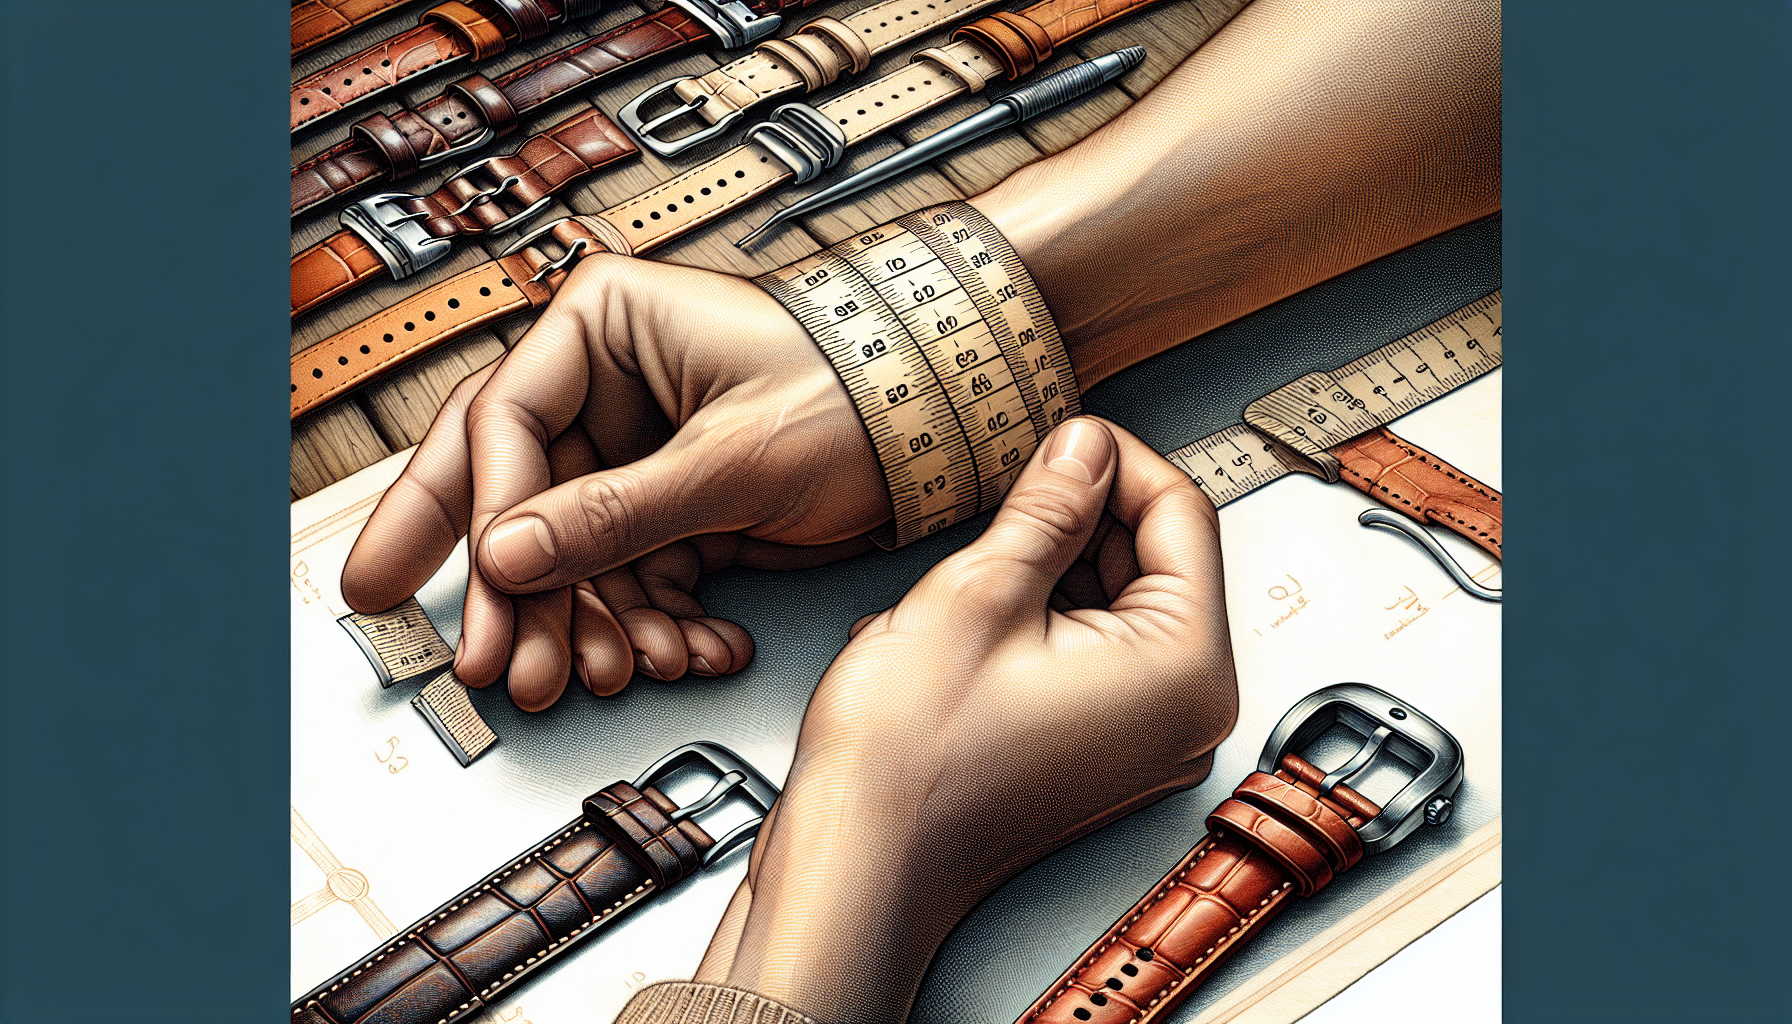 Illustration of measuring wrist size for a leather watch band